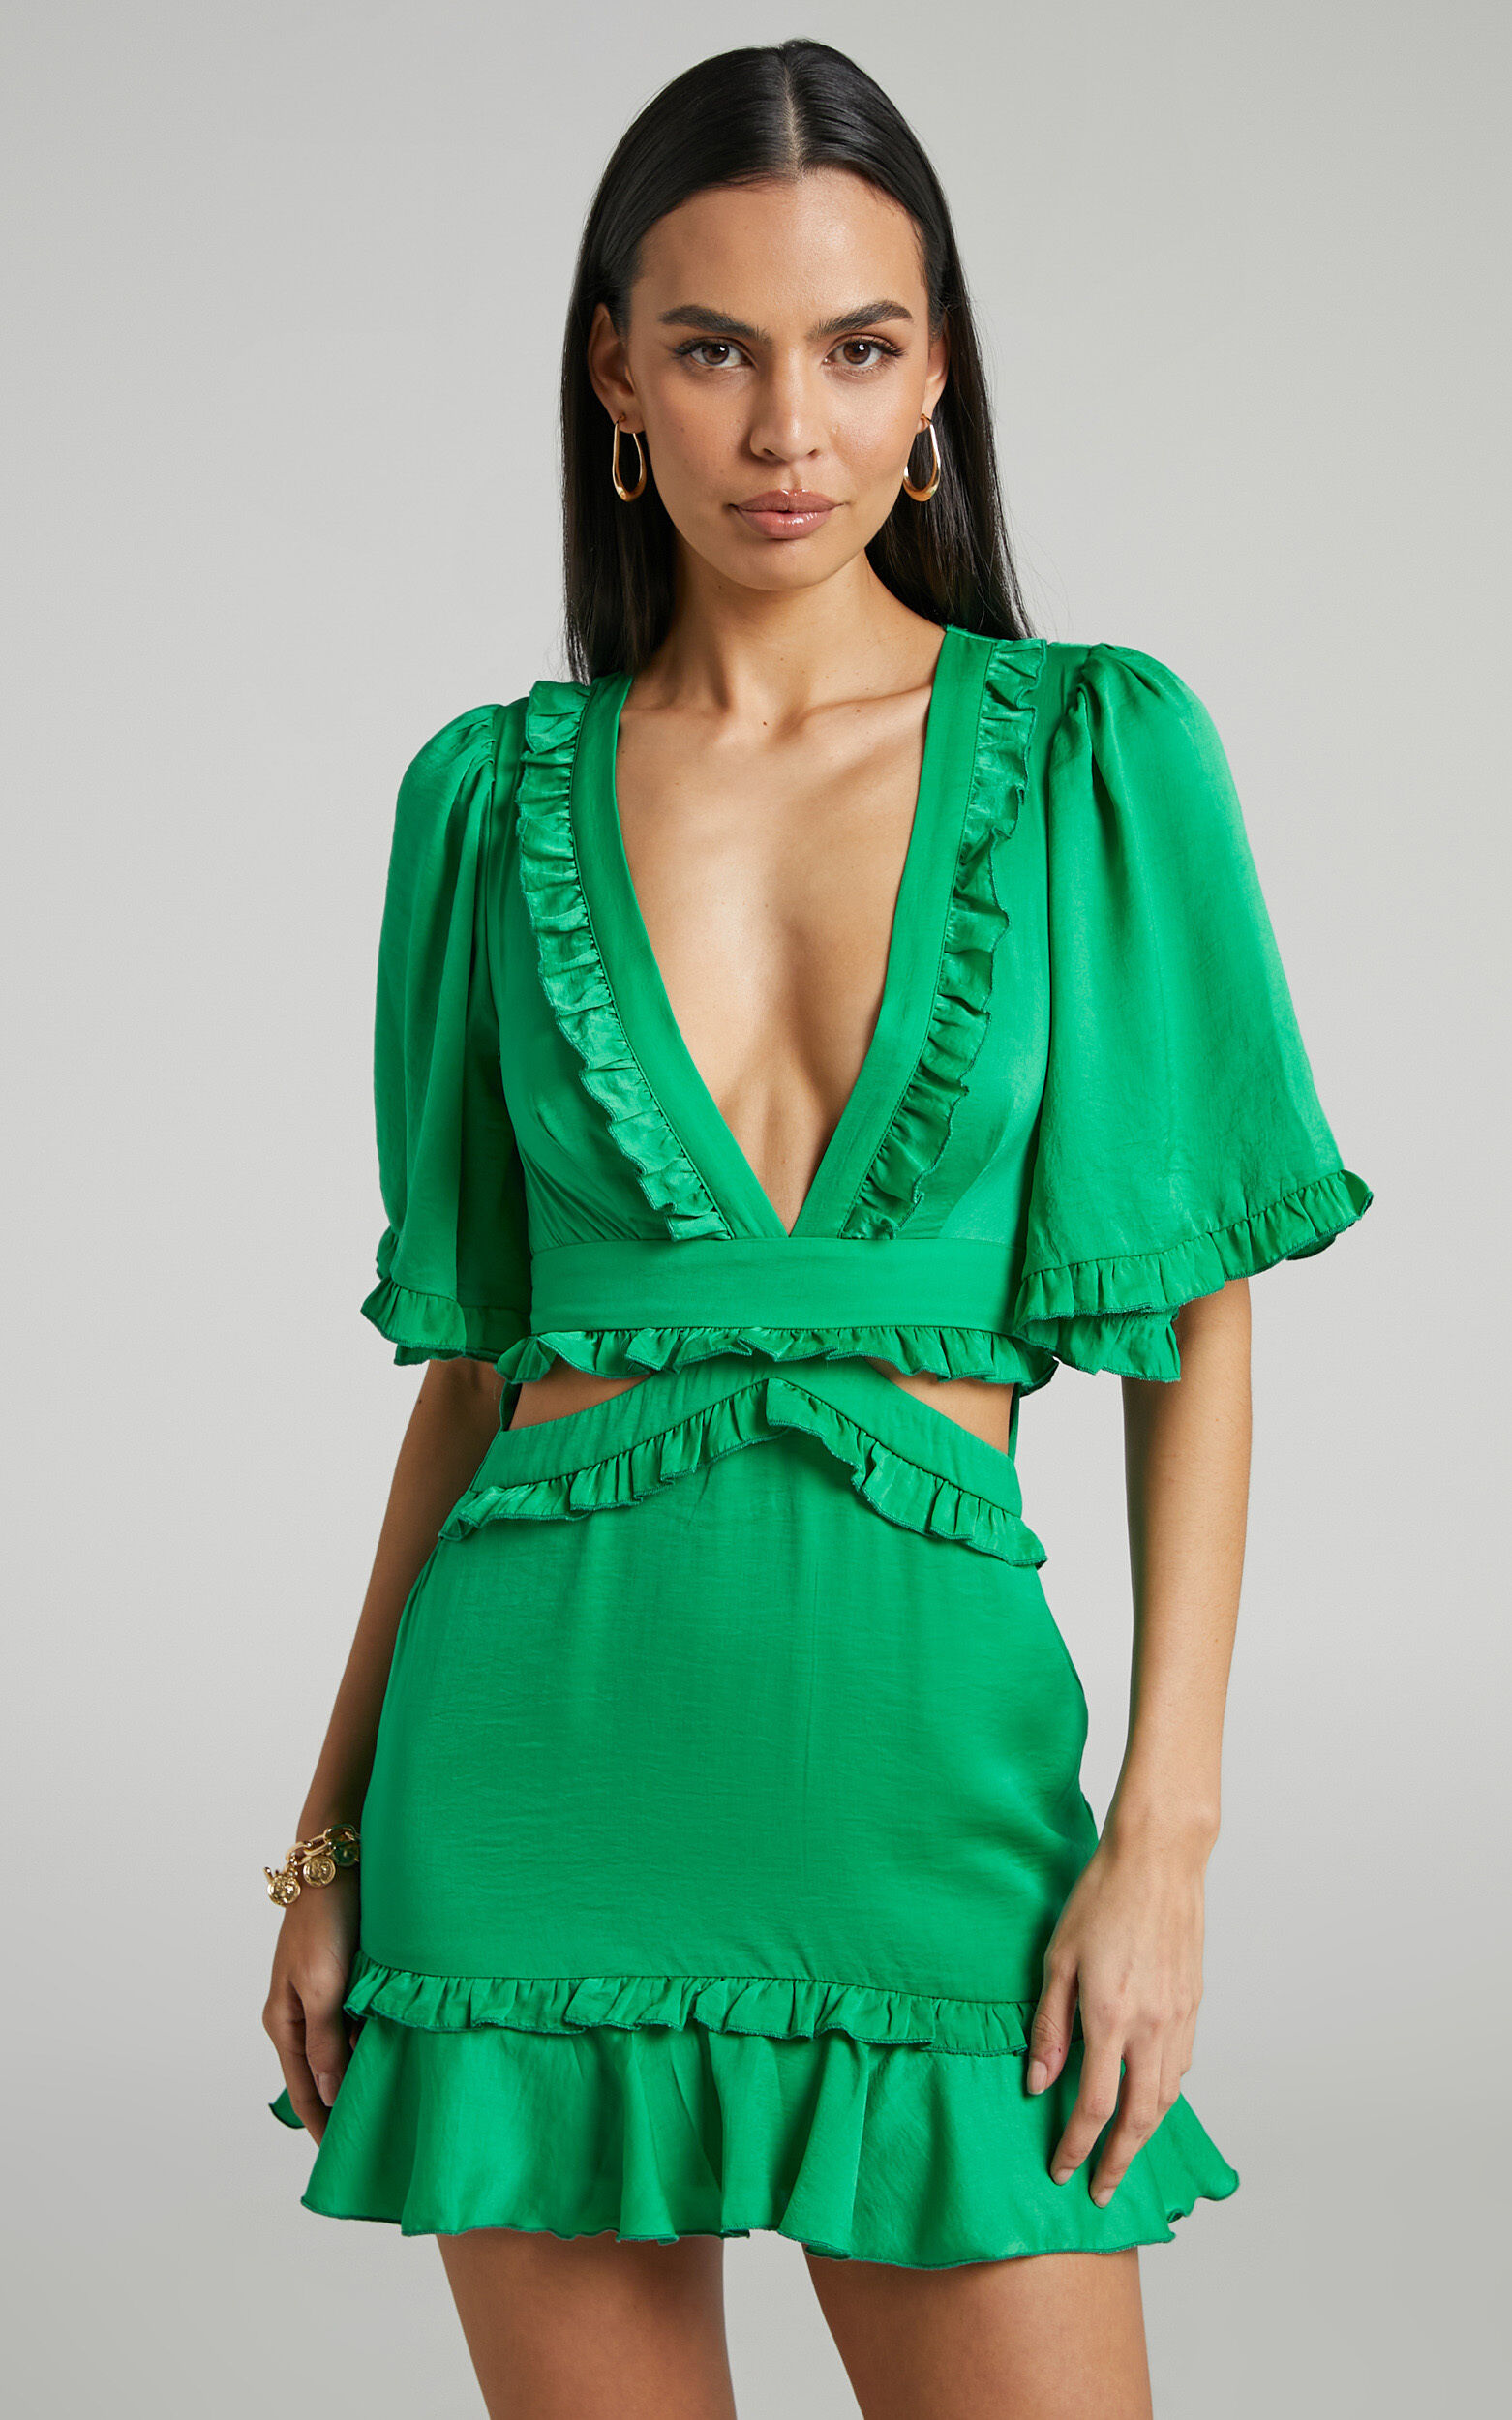 Maricris Open Back Bell Sleeve Frill Mini Dress in Green - 06, GRN1, super-hi-res image number null